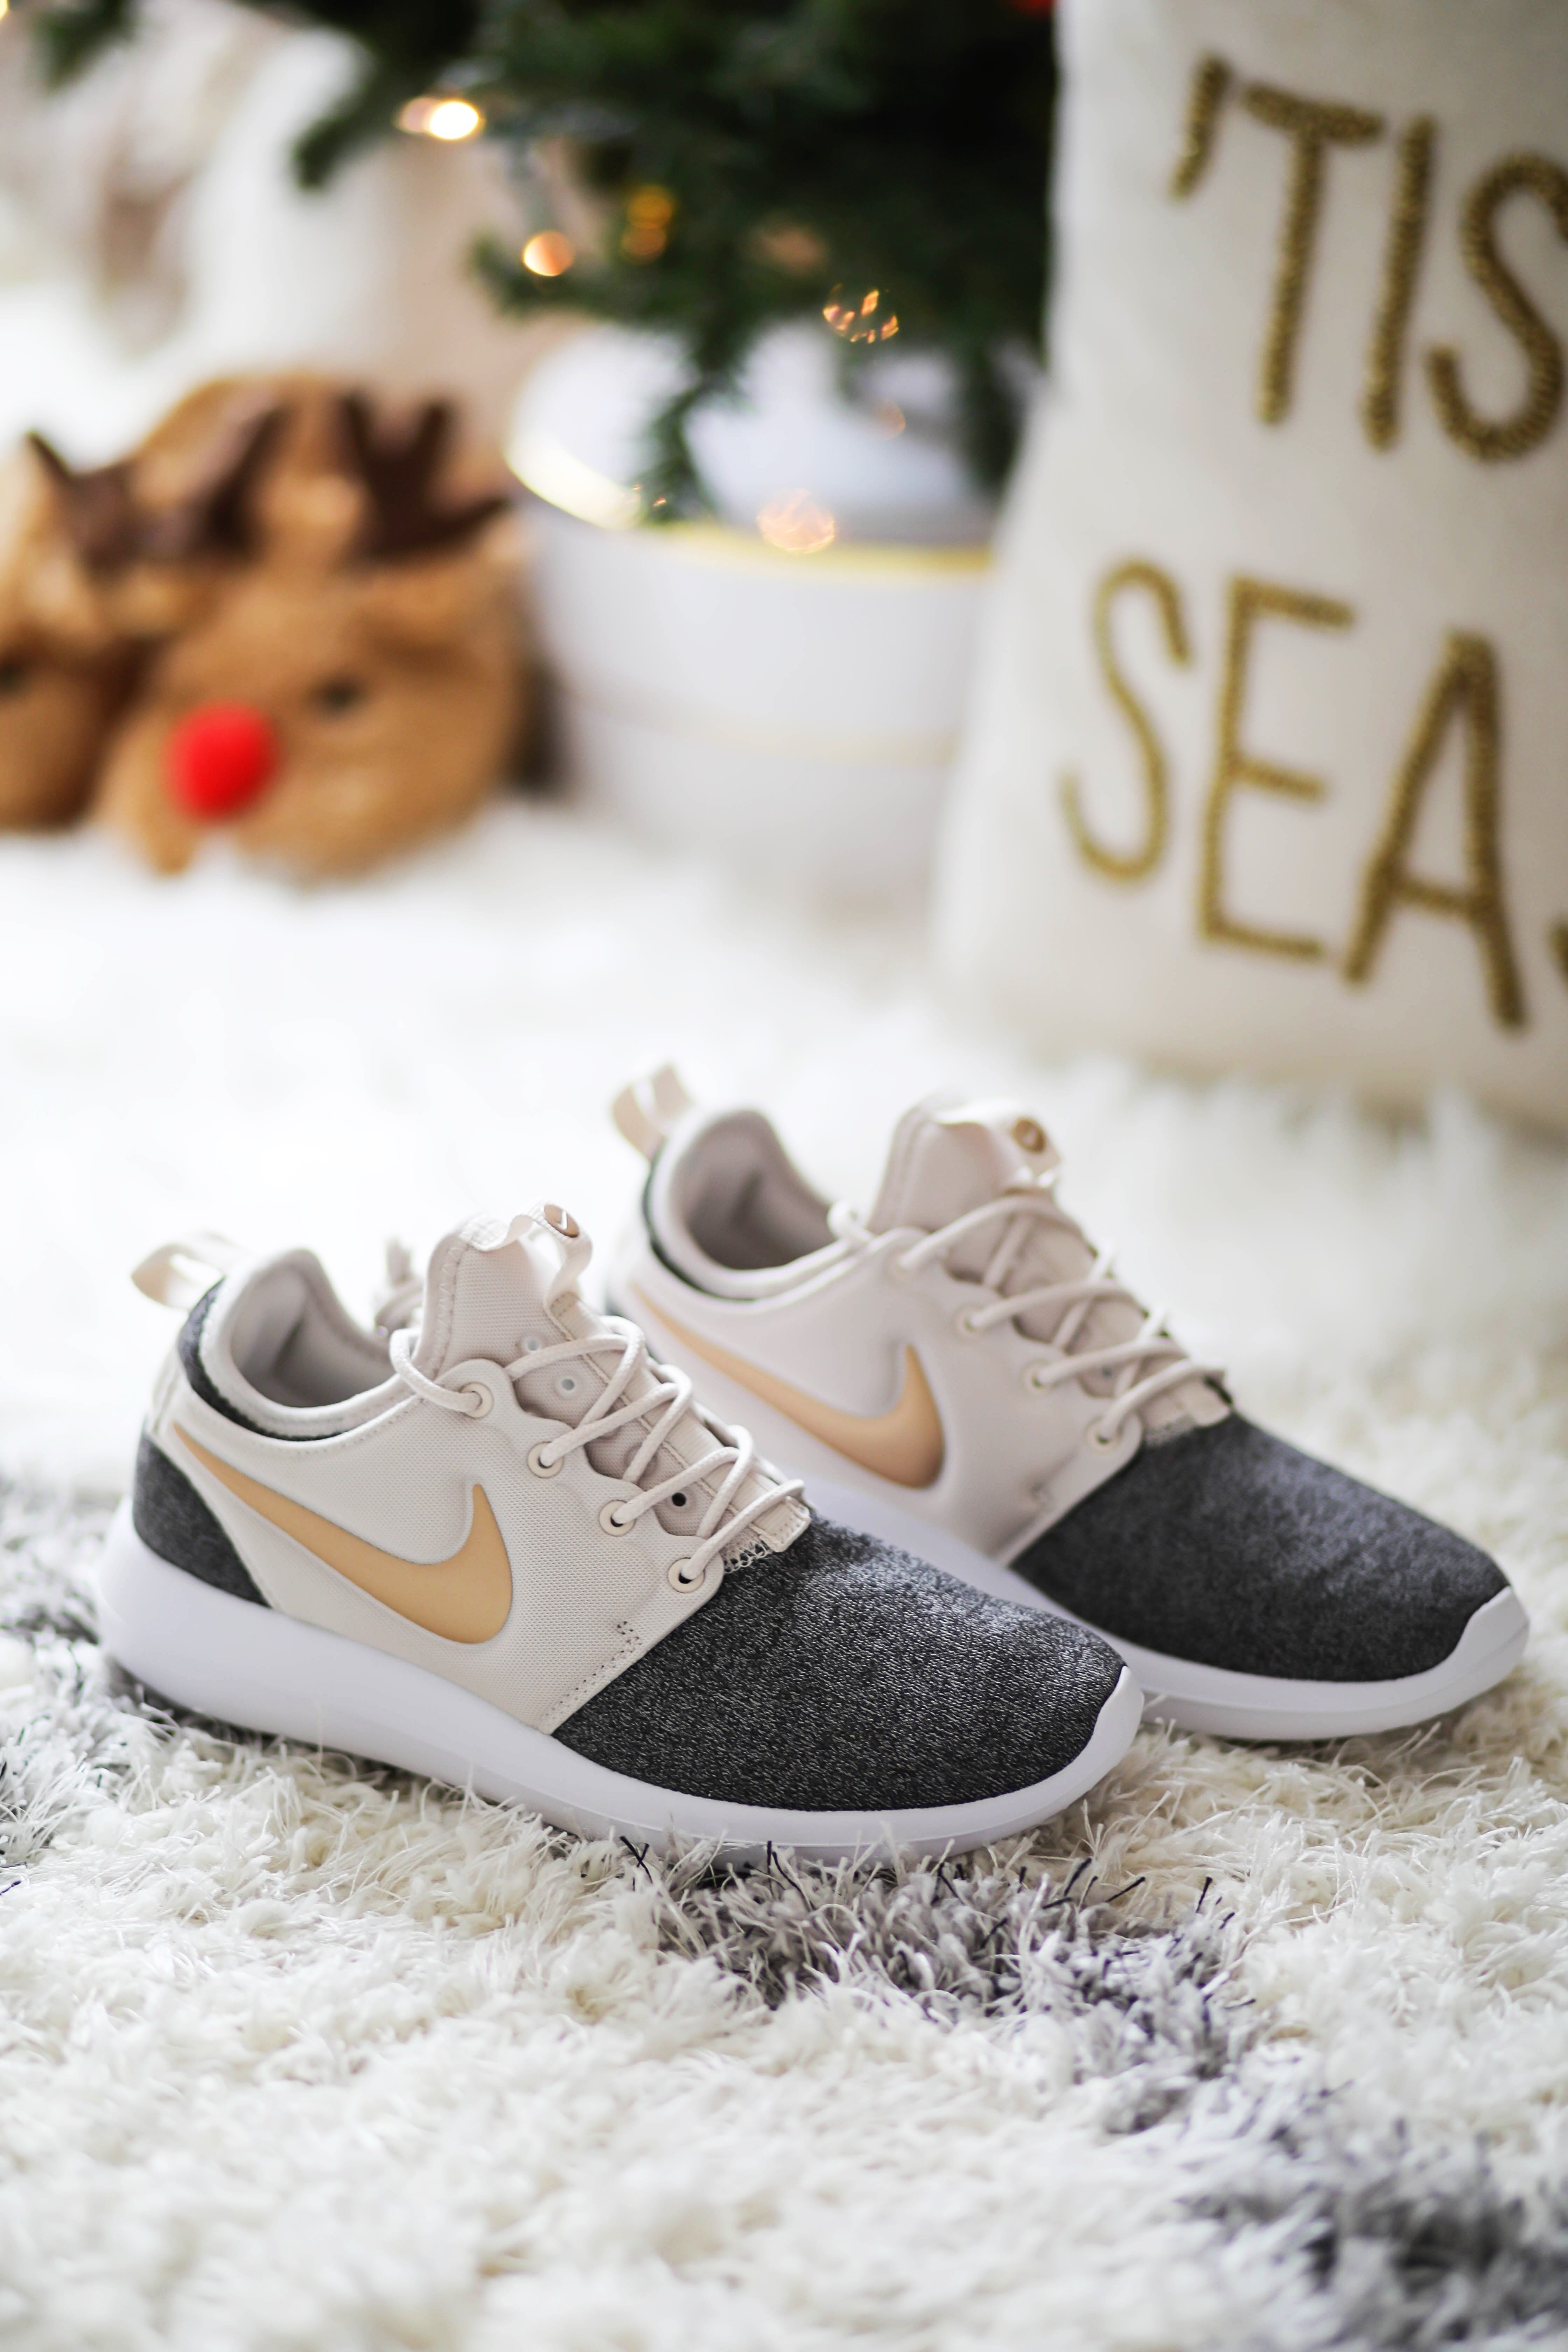  Women's Nike Roshe Two Knit Casual Shoes WHAT I GOT FOR CHRISTMAS 2017